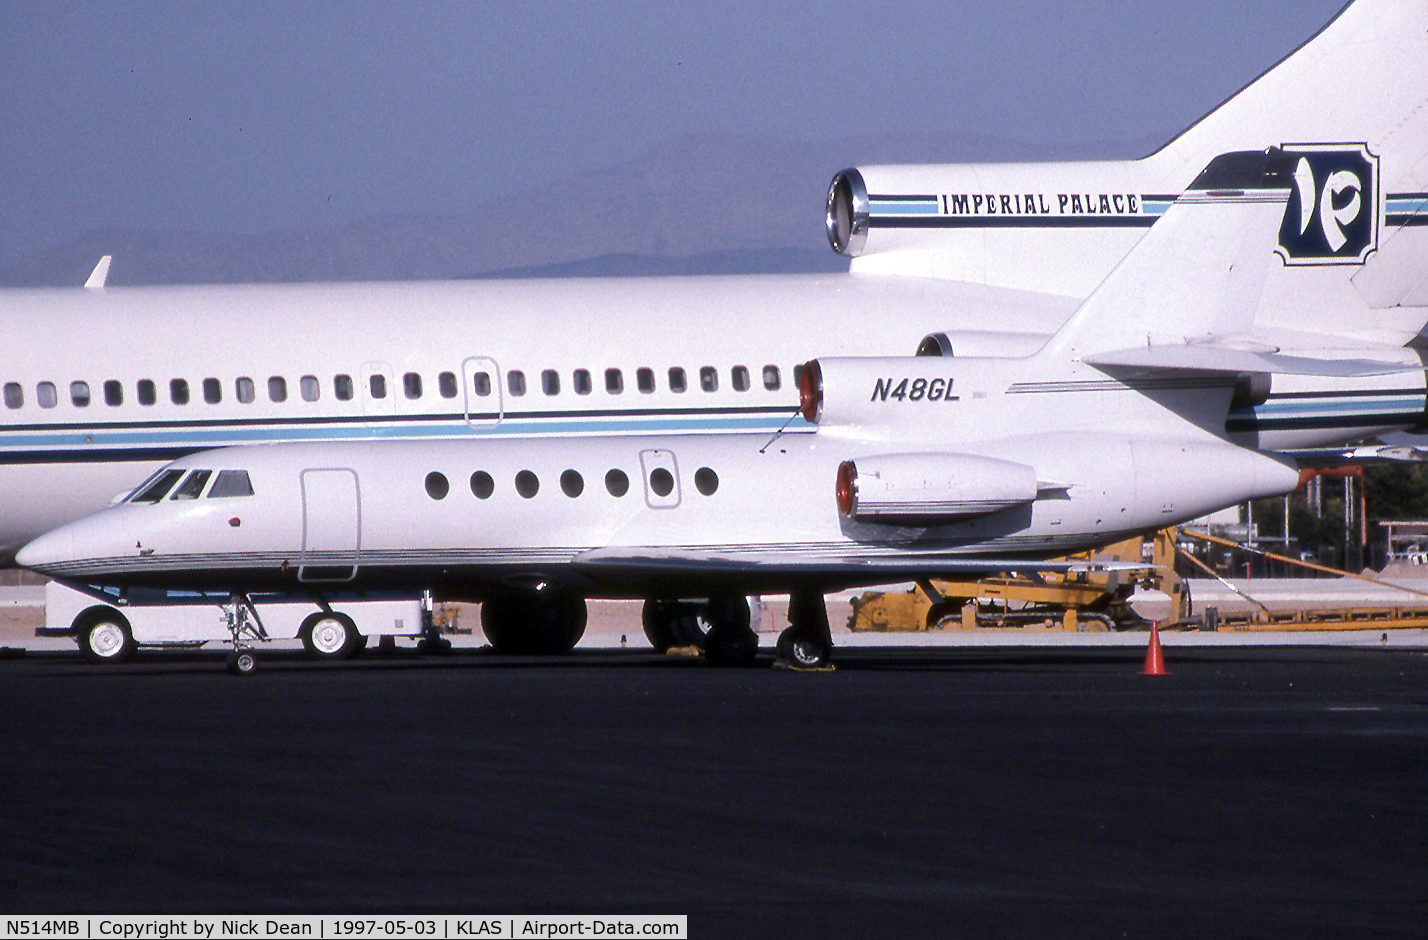 N514MB, 1986 Dassault Falcon 50 C/N 168, Seen here as N48GL dwarfed by the Imperial Palace B727 N7221P this airframe is currently registered n514MB as posted